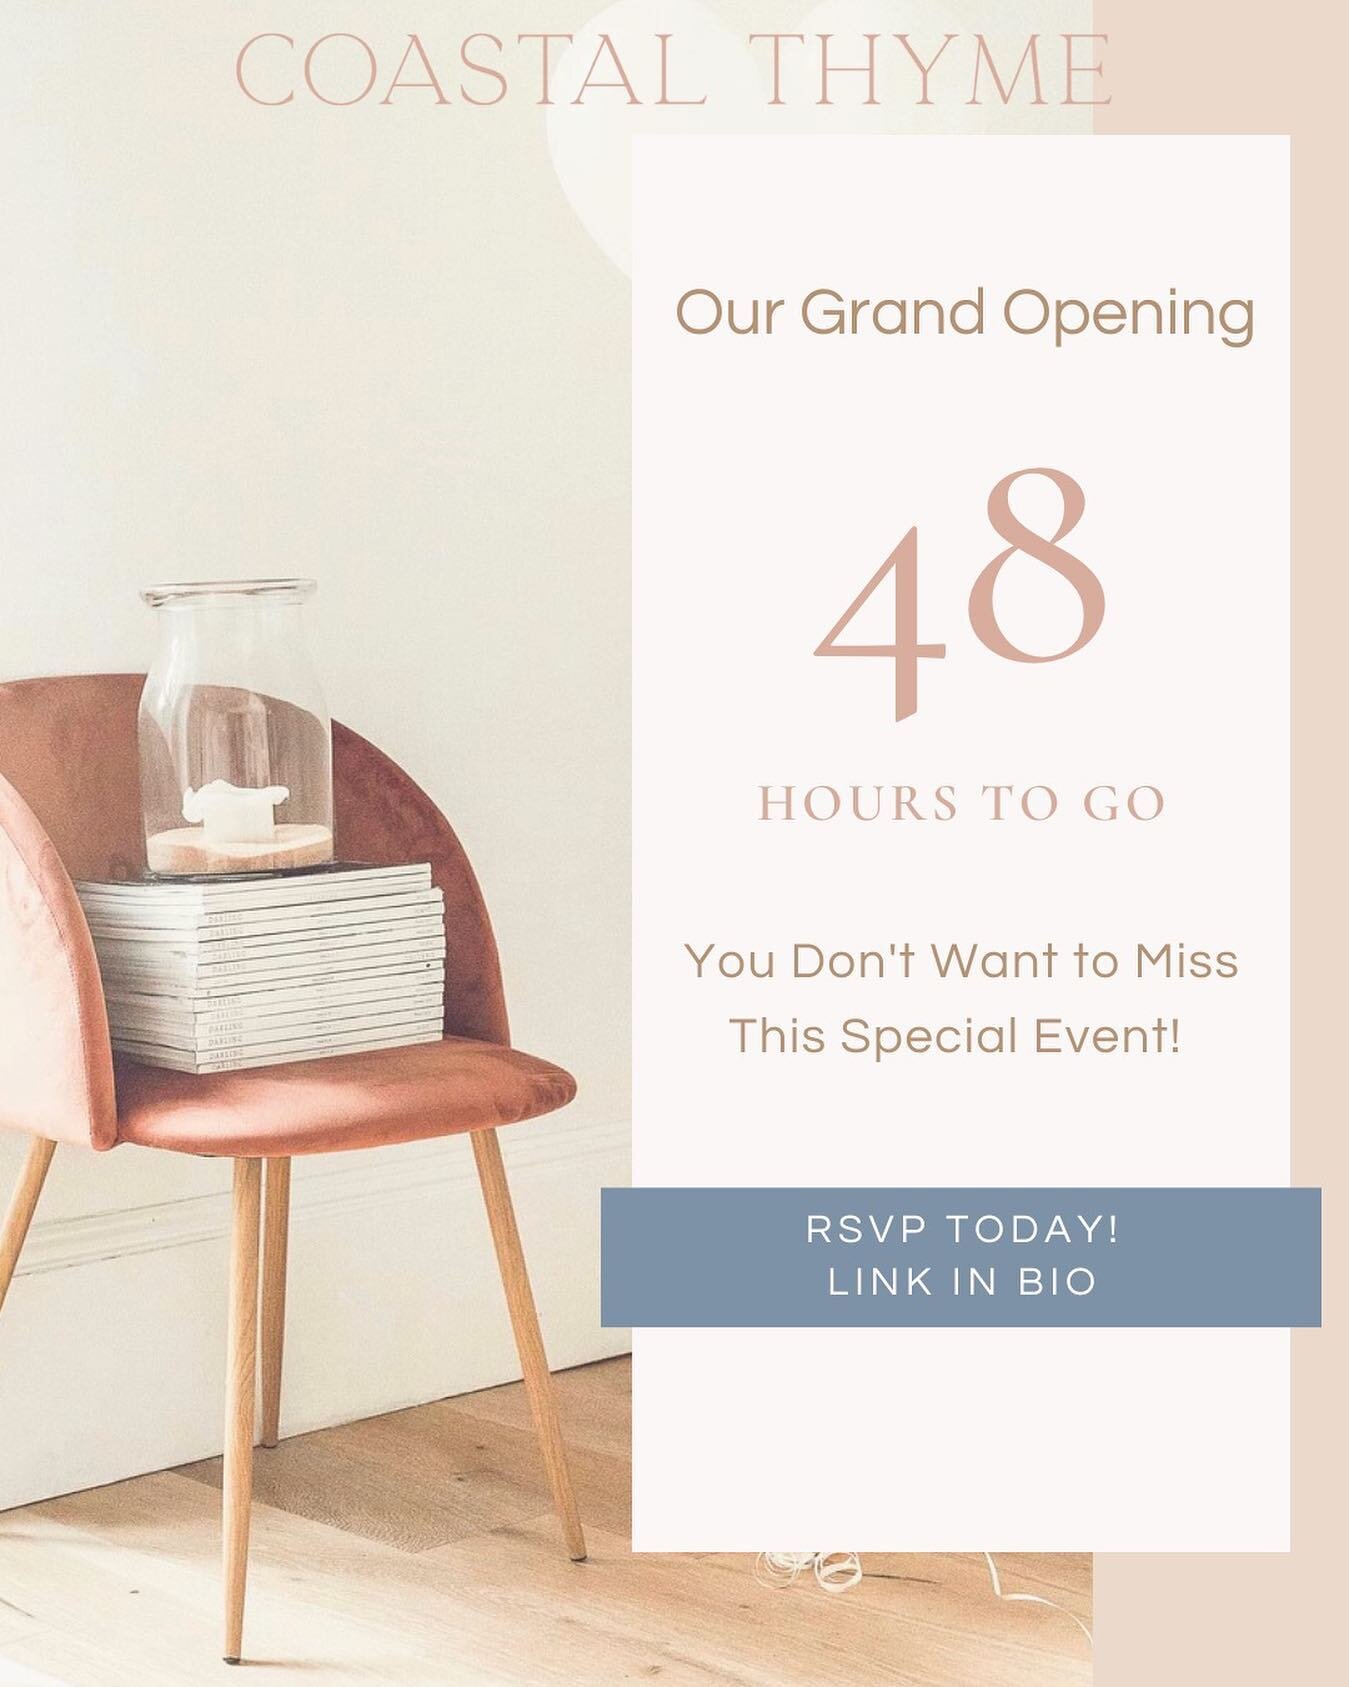 The Countdown is ON! ⏰✨

Only 48 hours to go!! Who&rsquo;s getting excited?! 🤩

Things are coming together beautifully and we cannot celebrate our soothing, healing space with all of you! 💕

See you in 48 hours (or less 😉)